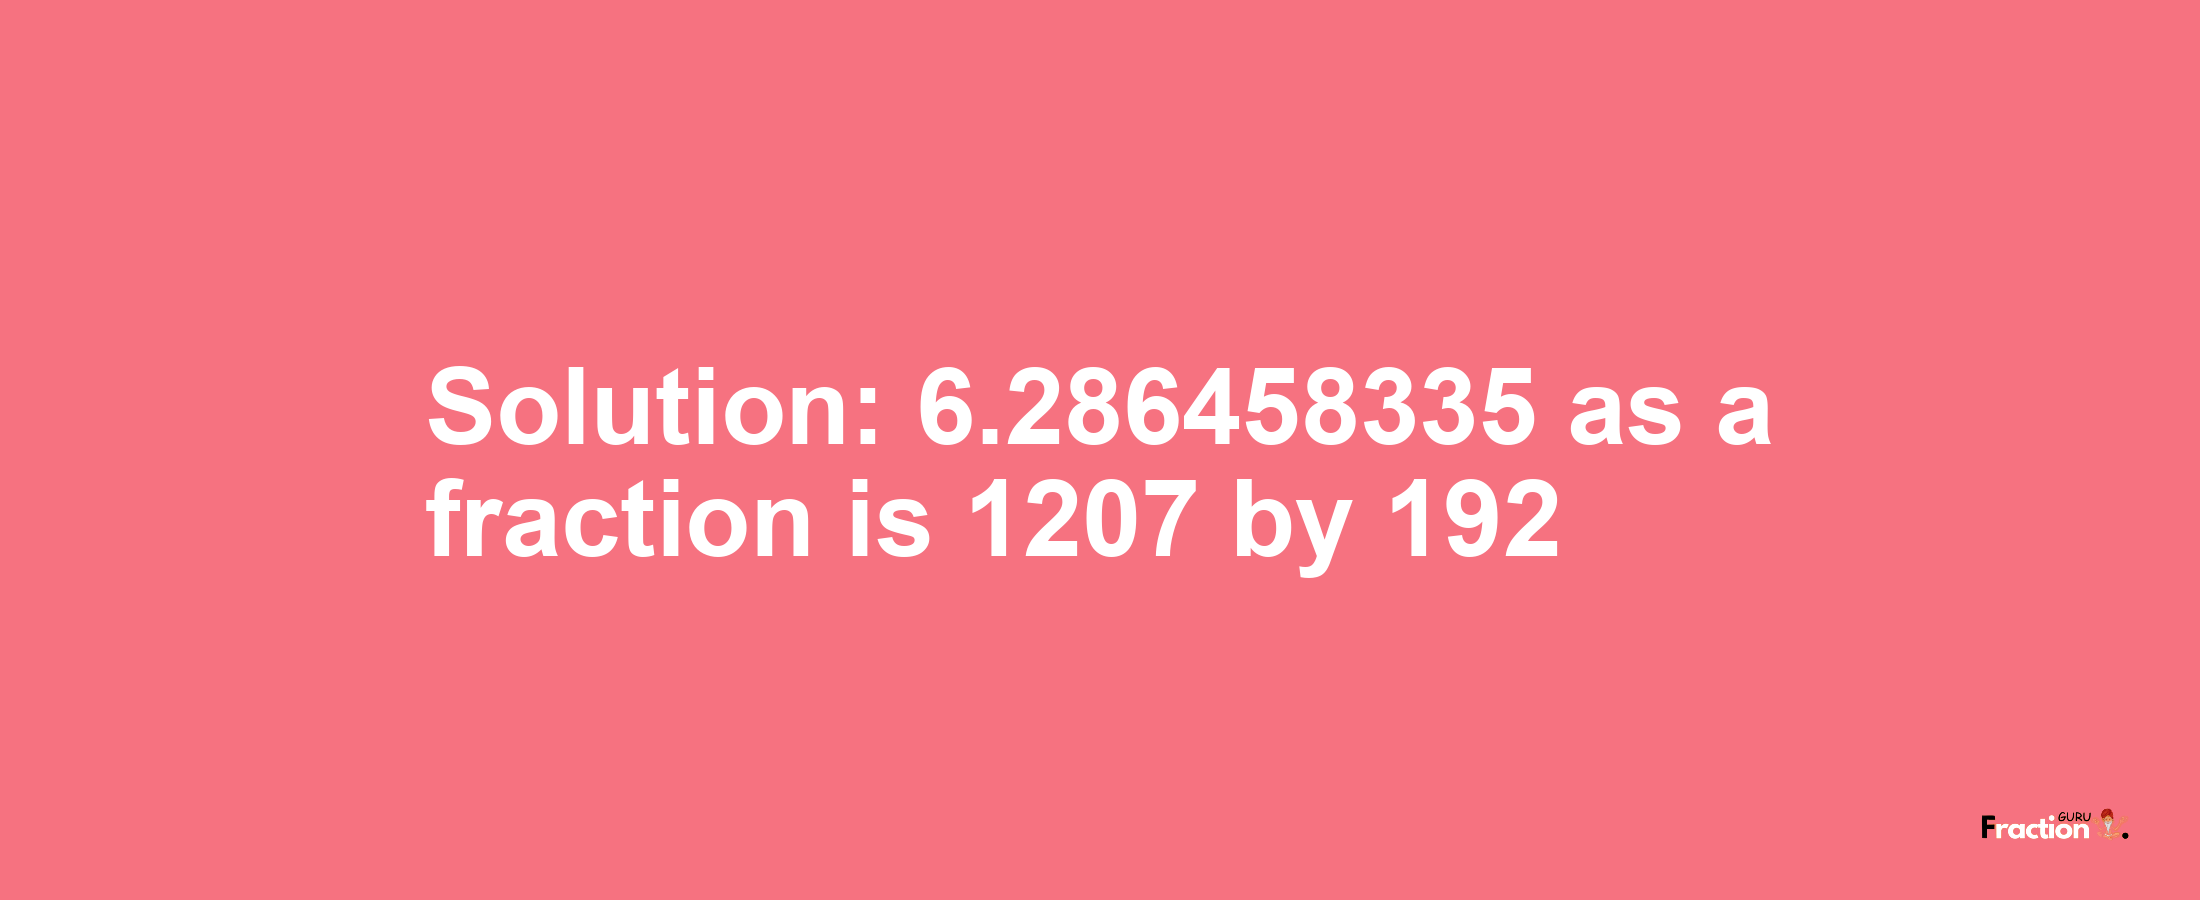 Solution:6.286458335 as a fraction is 1207/192